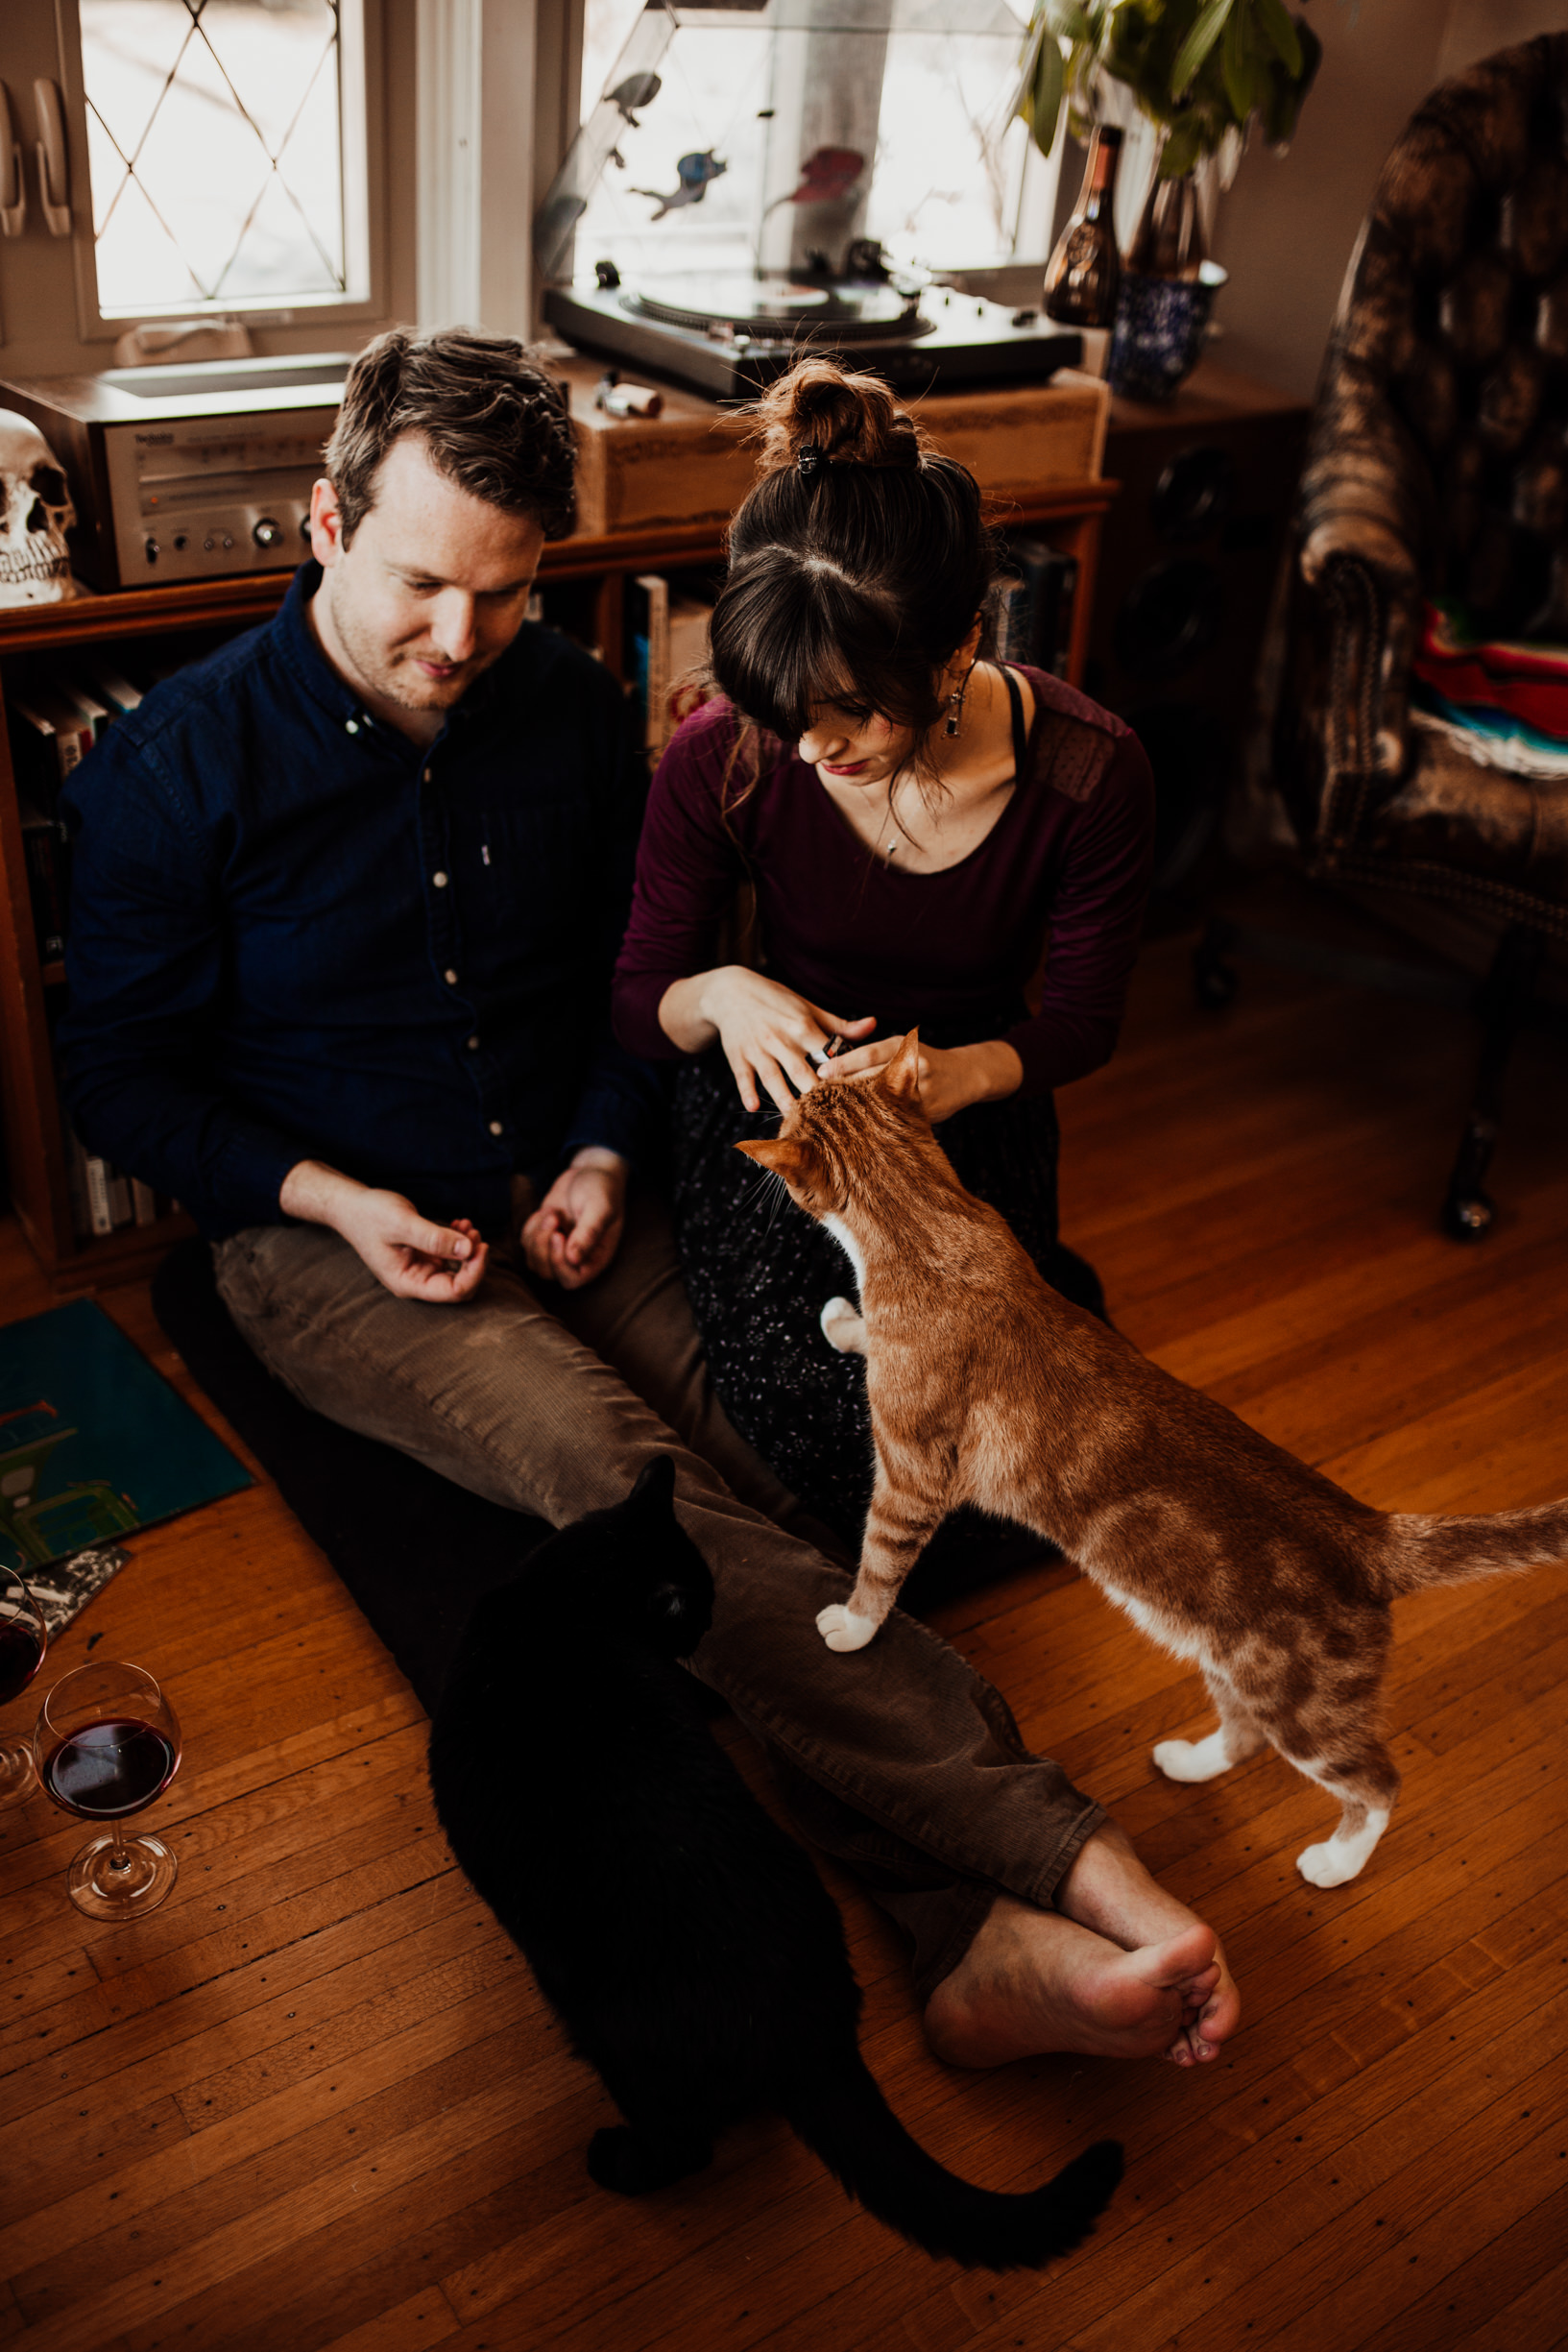 louisville-engagement-photographer-record-store-in-home-session-crystal-ludwick-photo (21 of 53).jpg